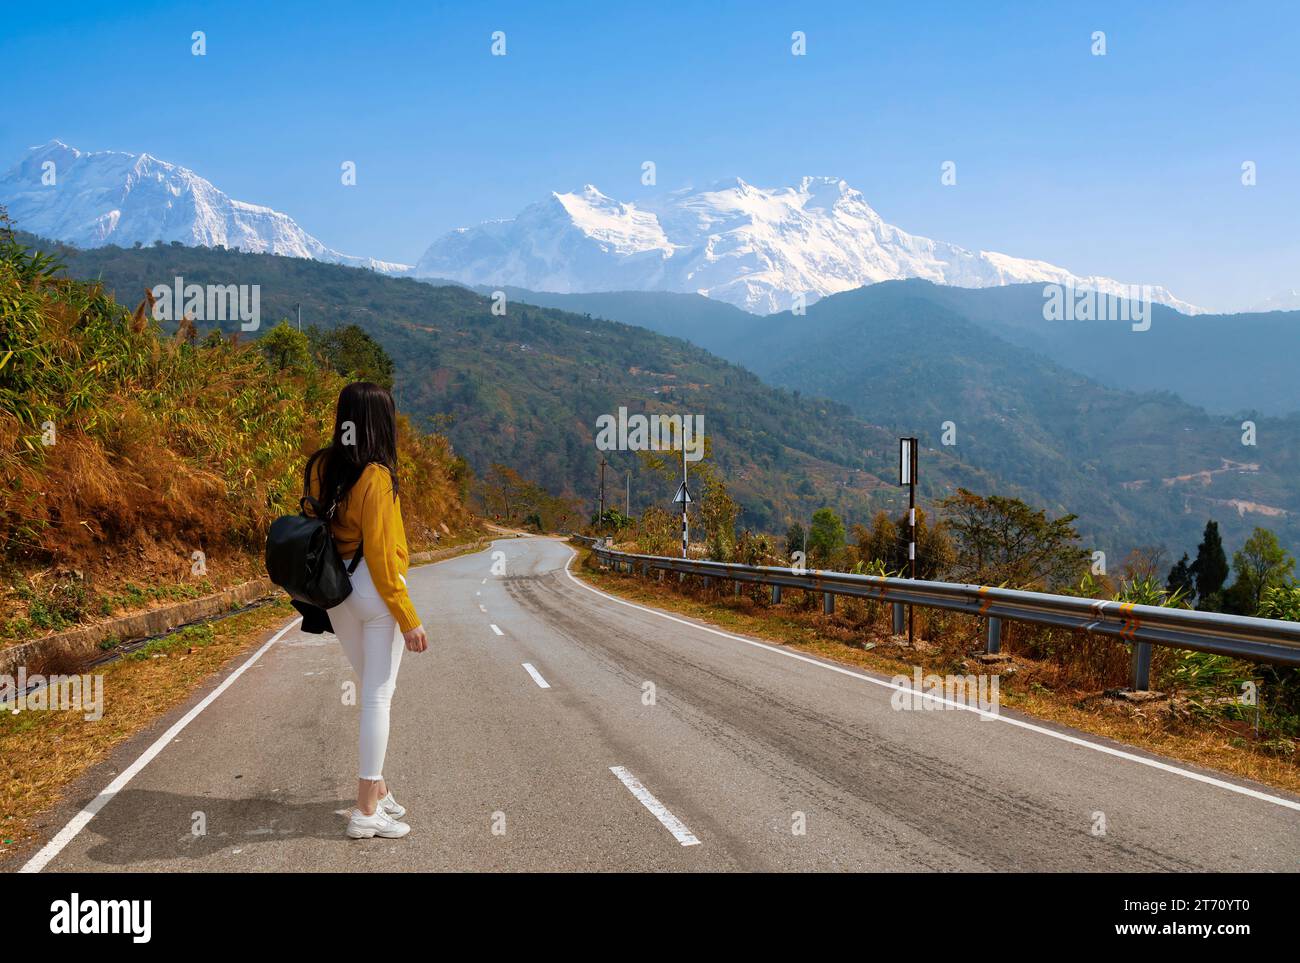 Female tourist on highway road with view of scenic mountain landscape and the Kanchenjunga Himalaya range on way to Tinchuley, Darjeeling, India Stock Photo